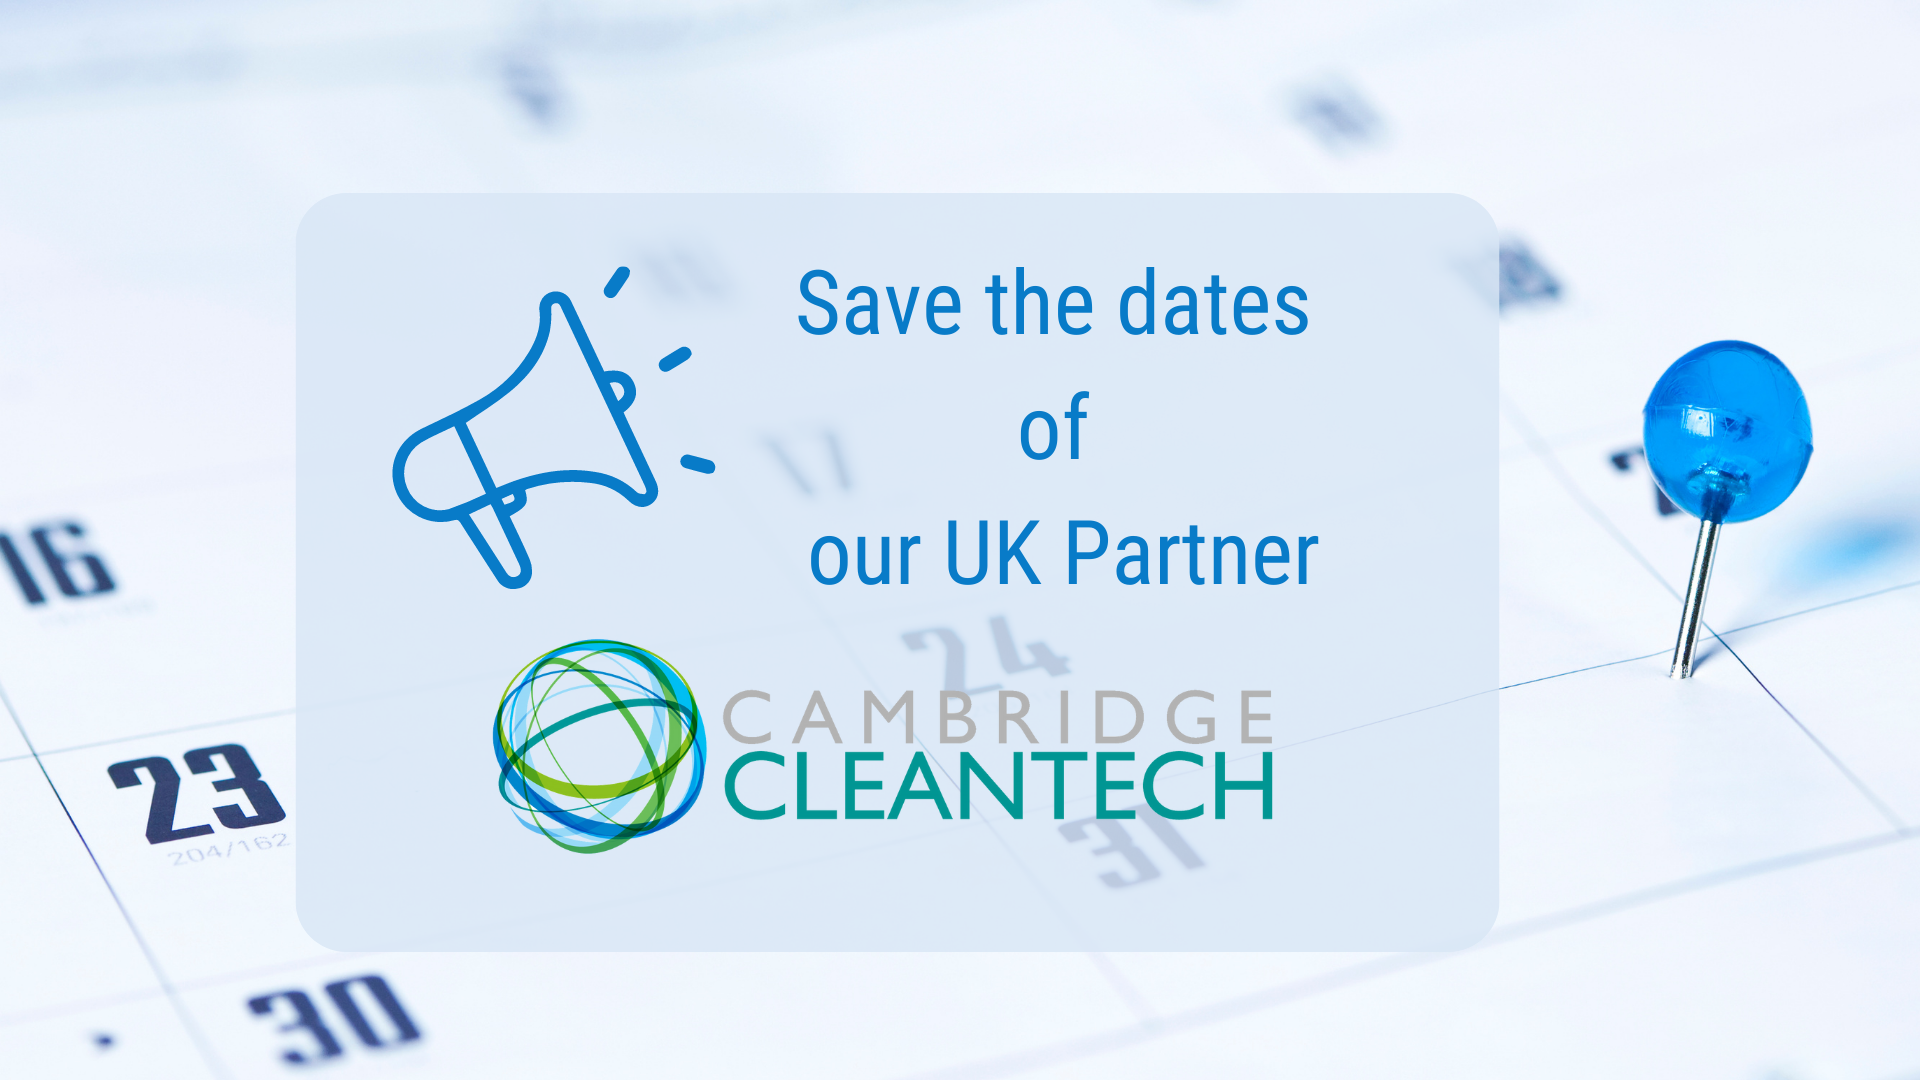 Save the dates of these events by our British Partner Cambridge Cleantech